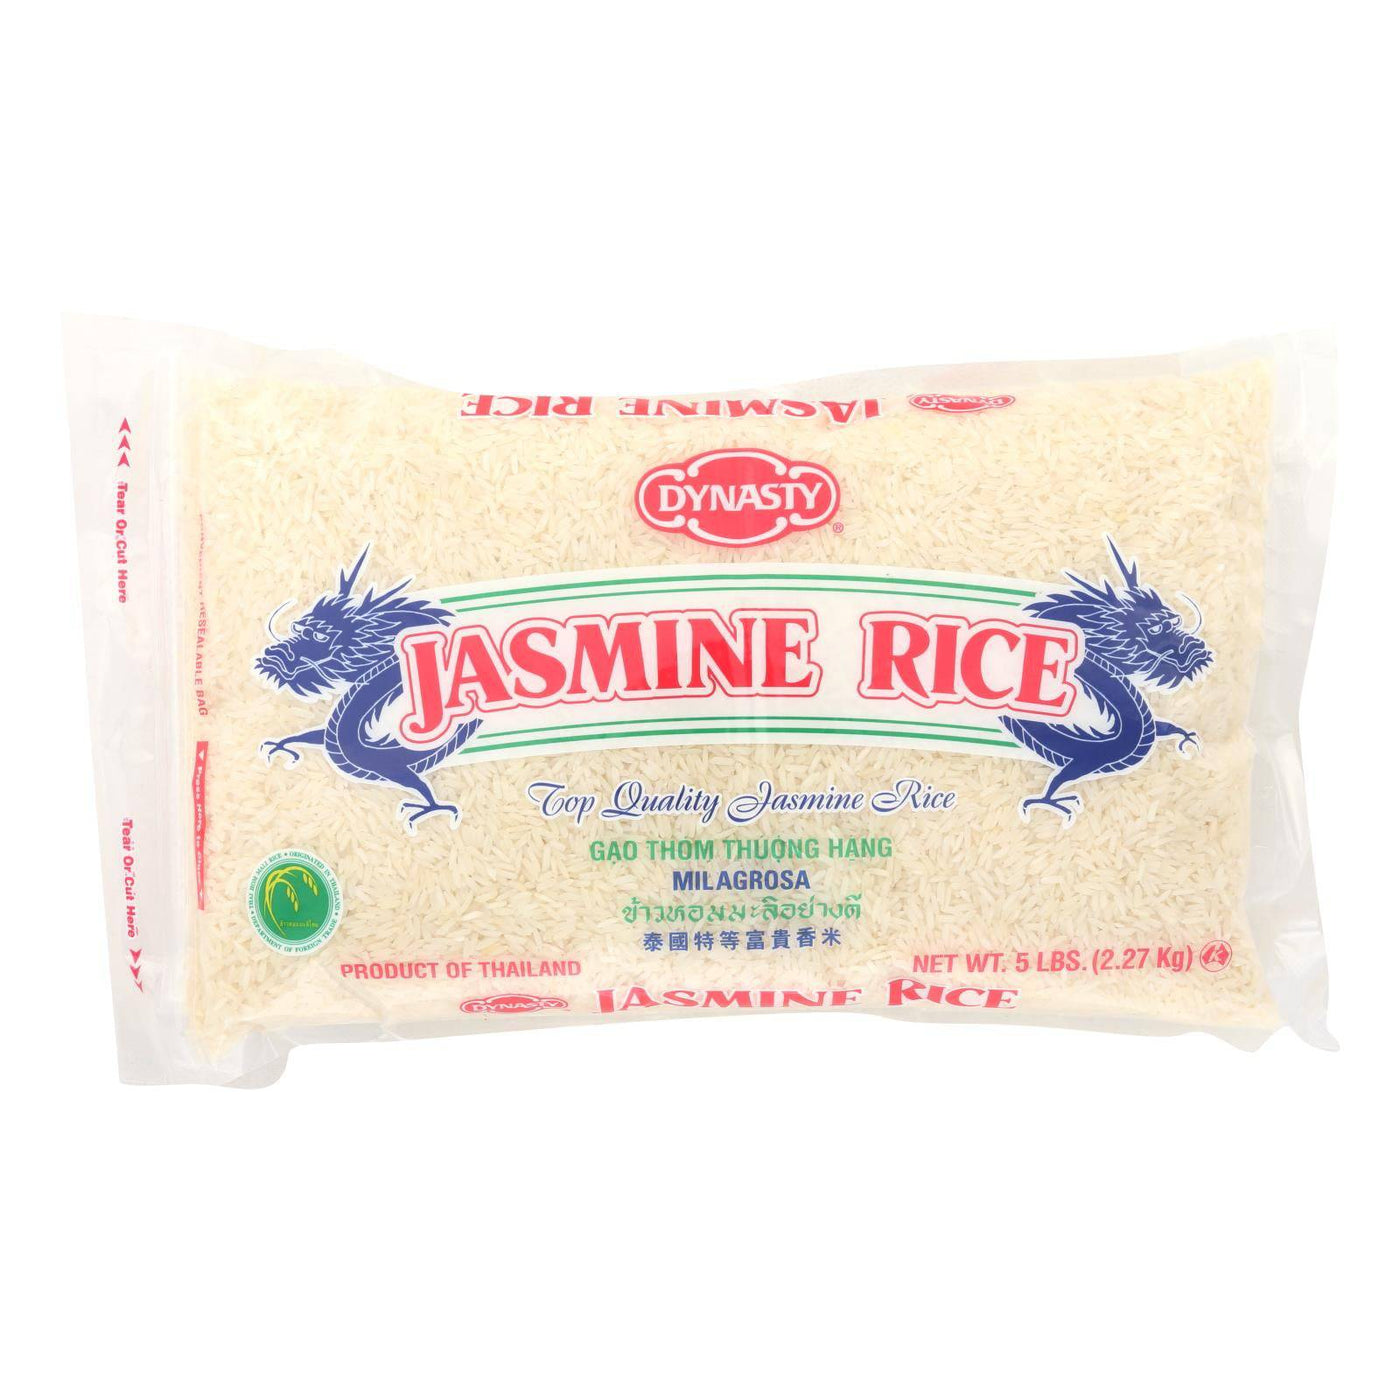 Buy Dynasty Rice - Jasmine - Case Of 6 - 5 Lb.  at OnlyNaturals.us